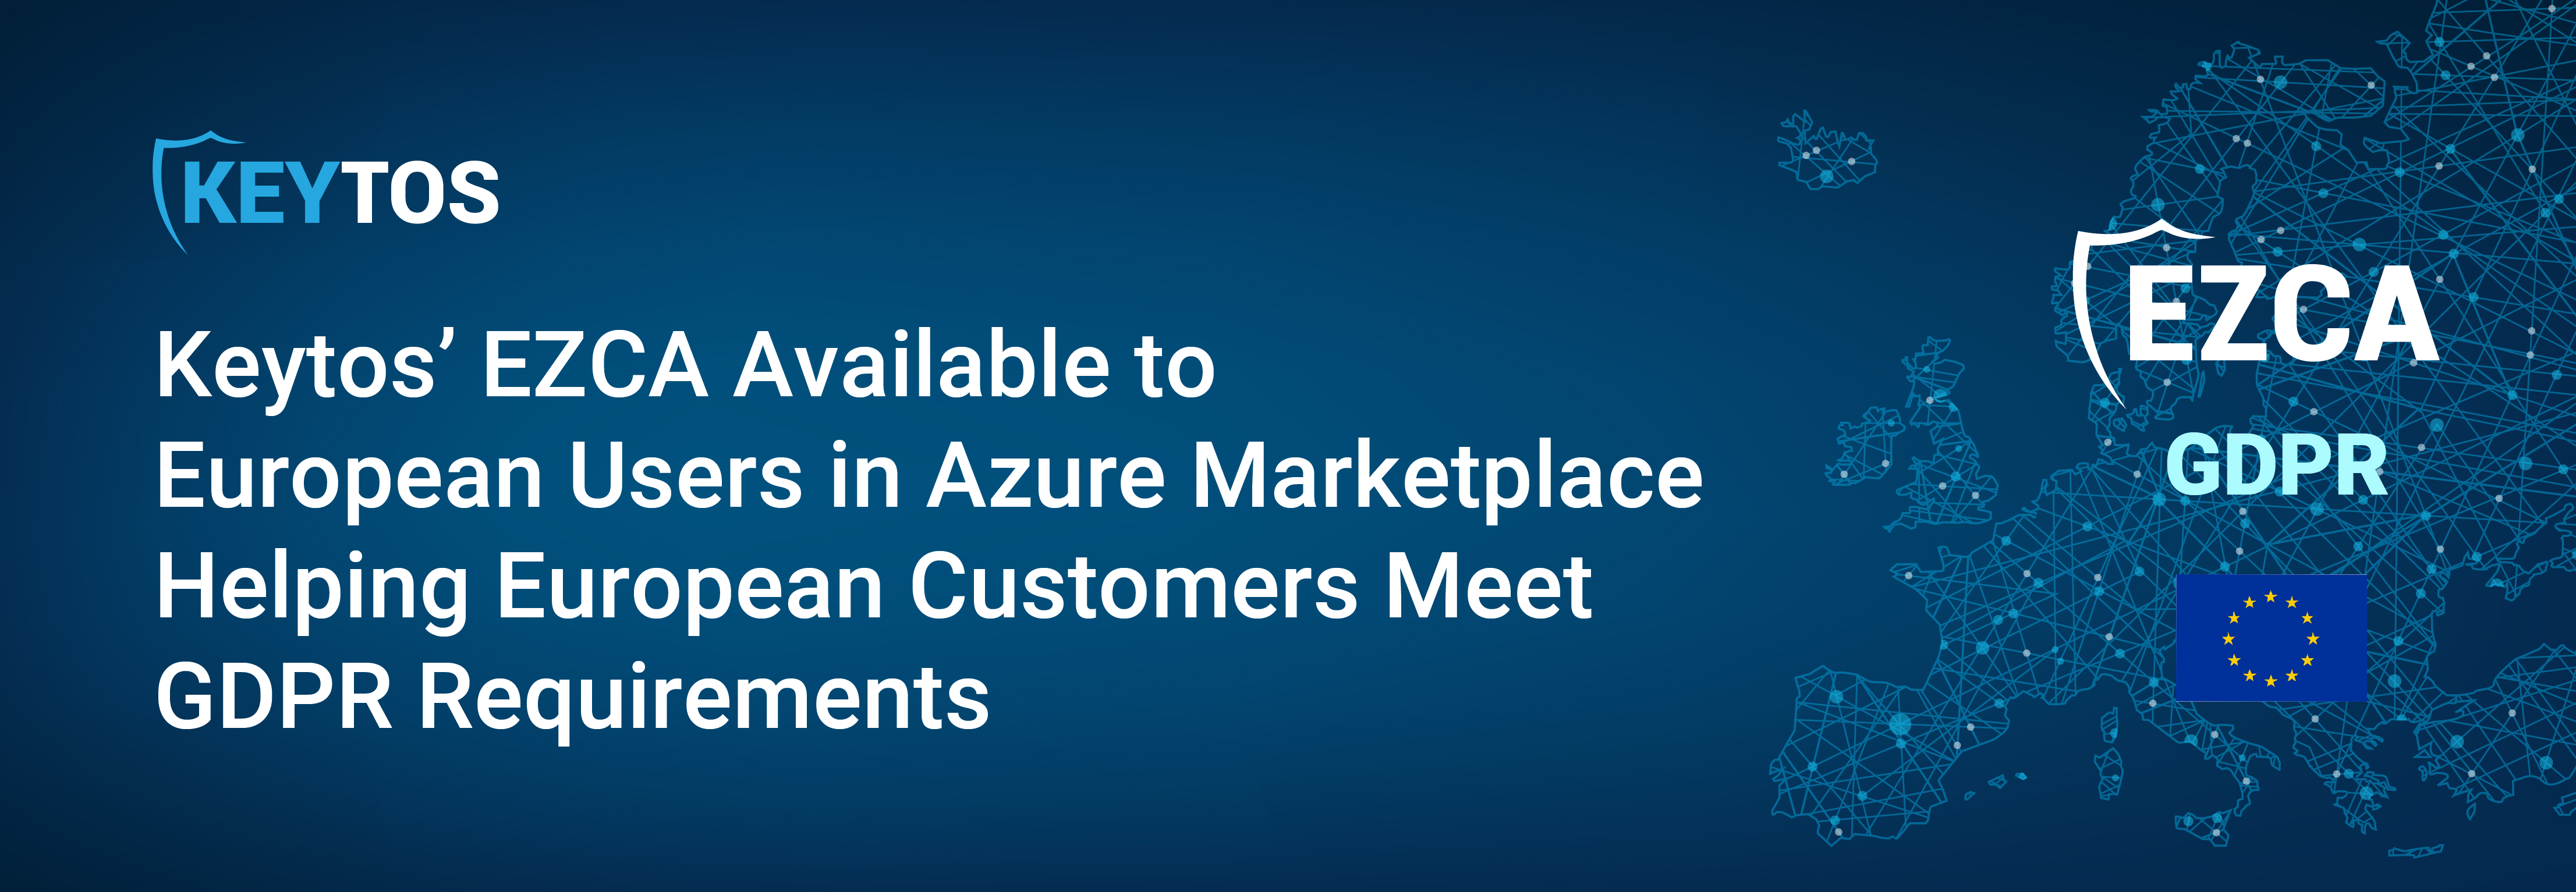 Keytos’ EZCA Available to European Users in Azure Marketplace Helping European Customers Meet GDPR Requirements